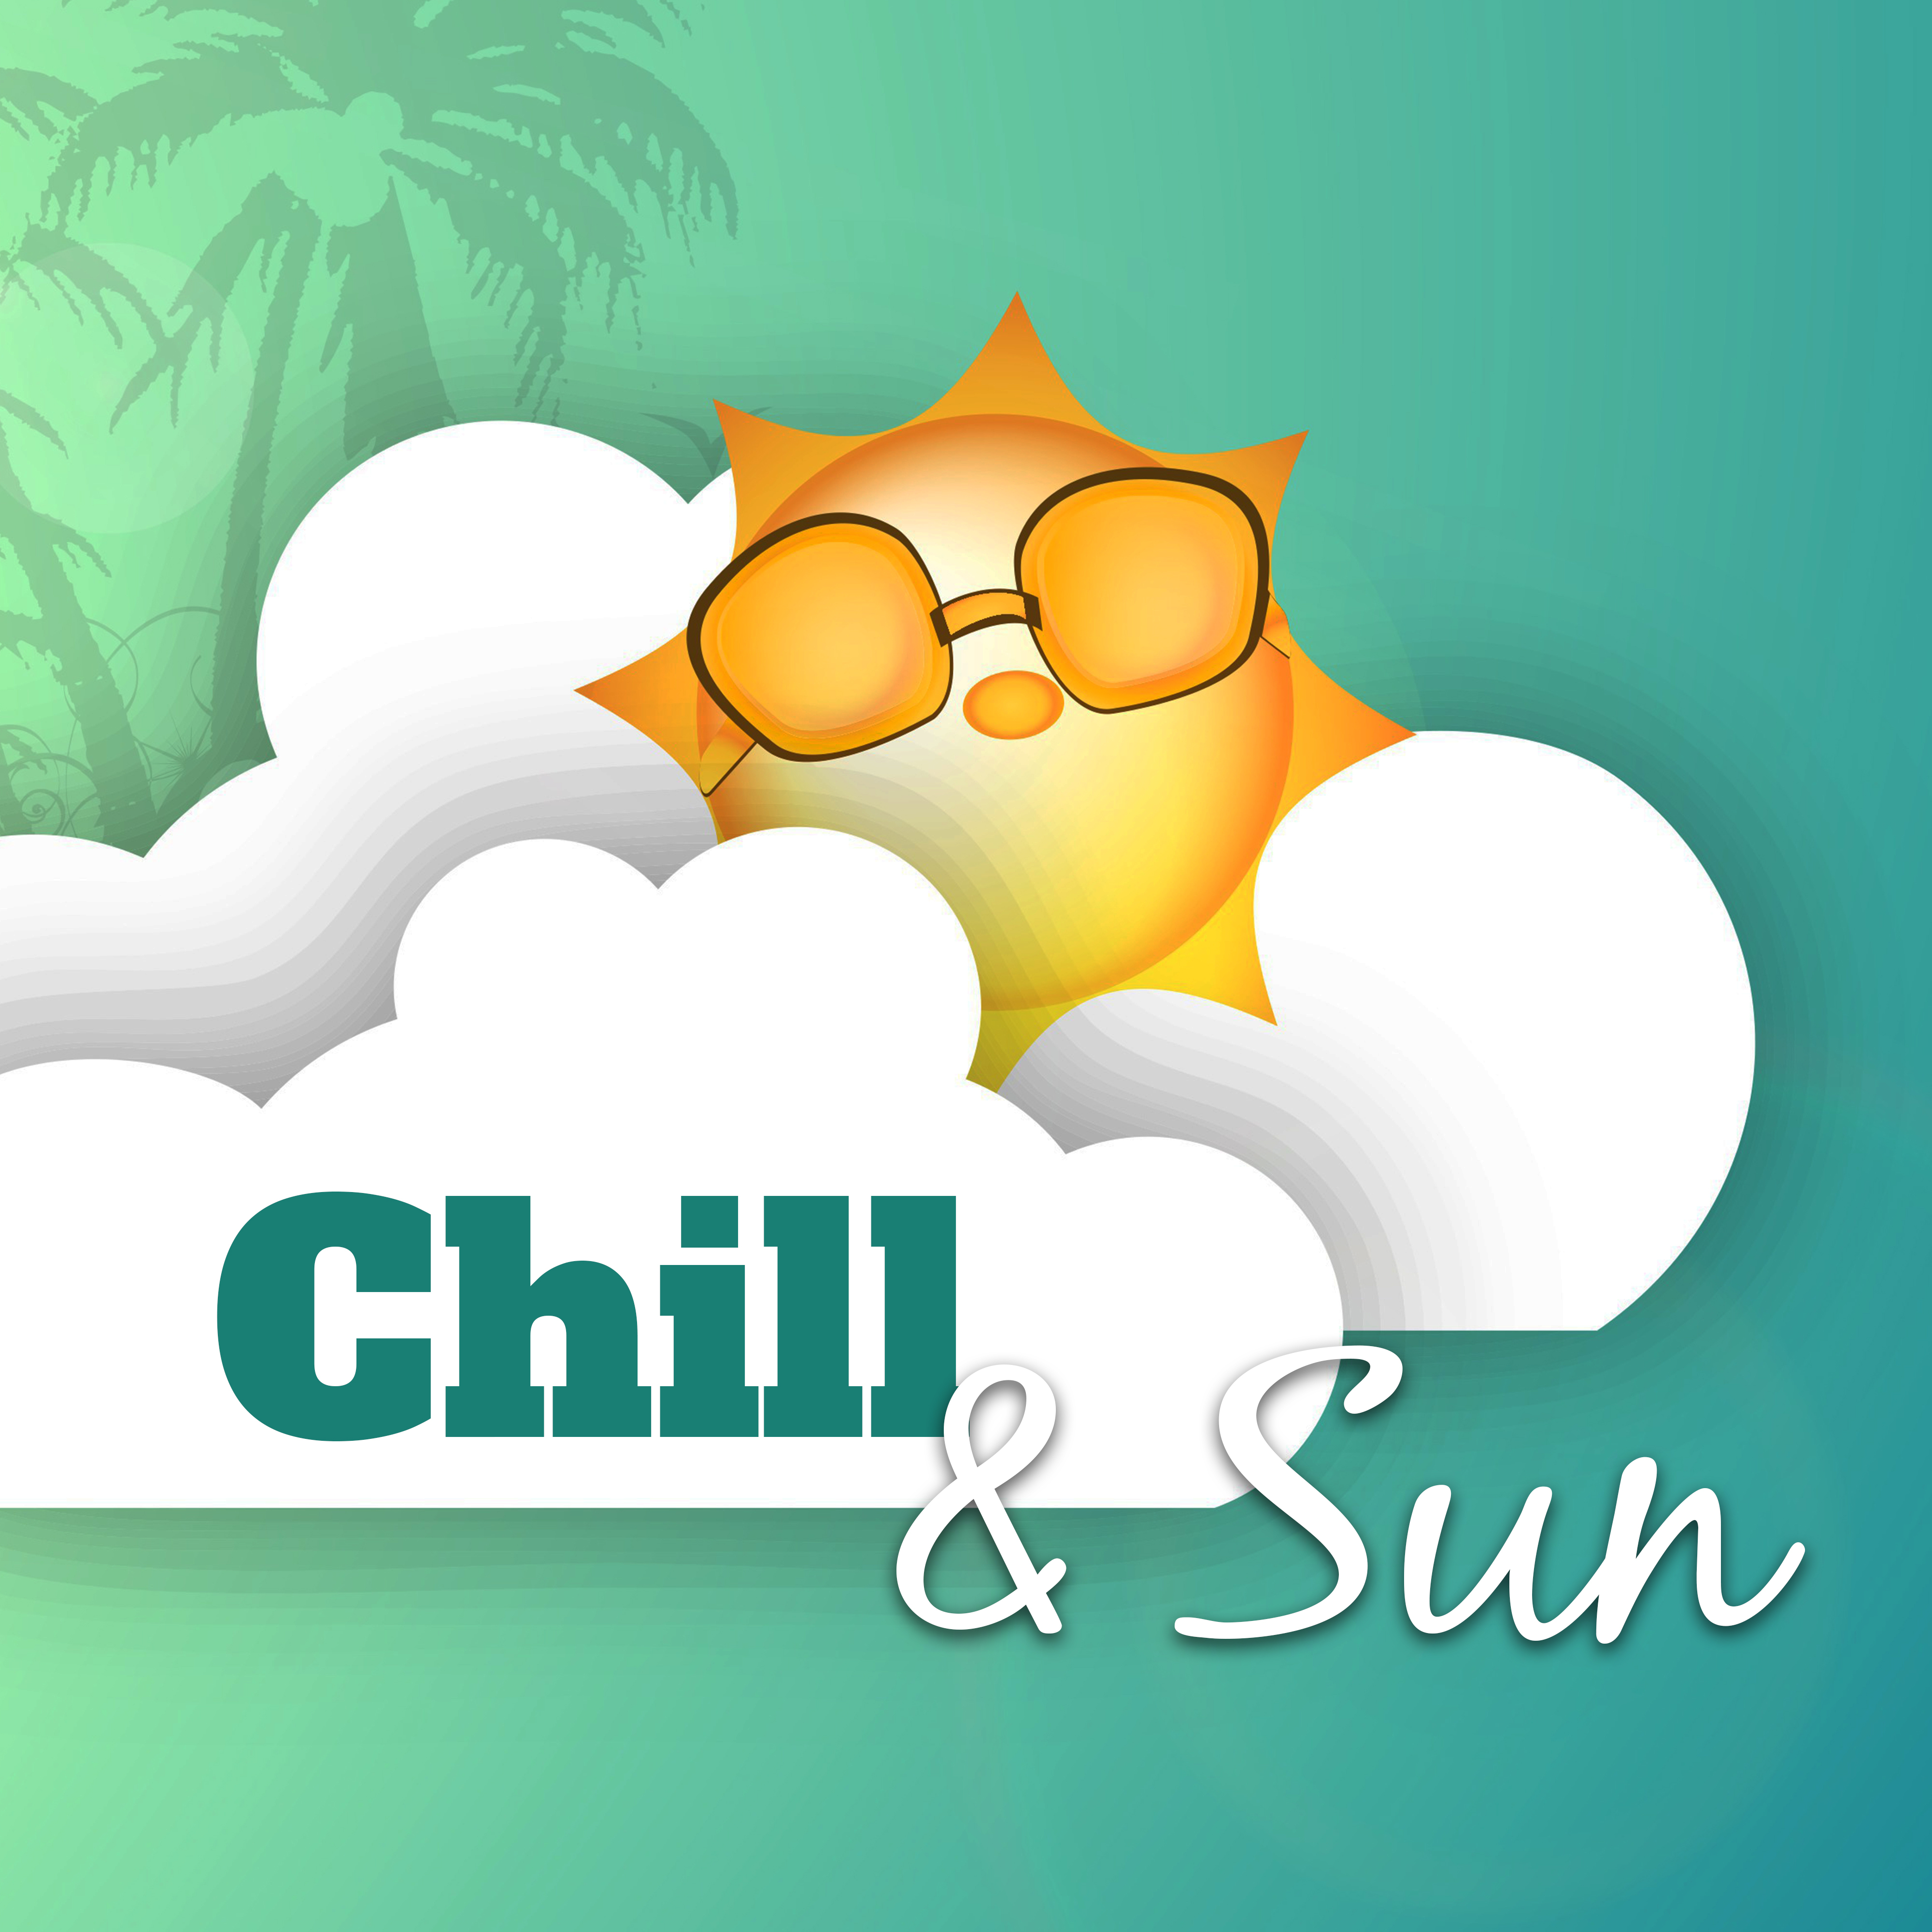 Chill  Sun  Ibiza Summertime, Sunrise Feeling, Ambient Summer, Holiday Vibes, Relax Under Palms, Bar Chill Out